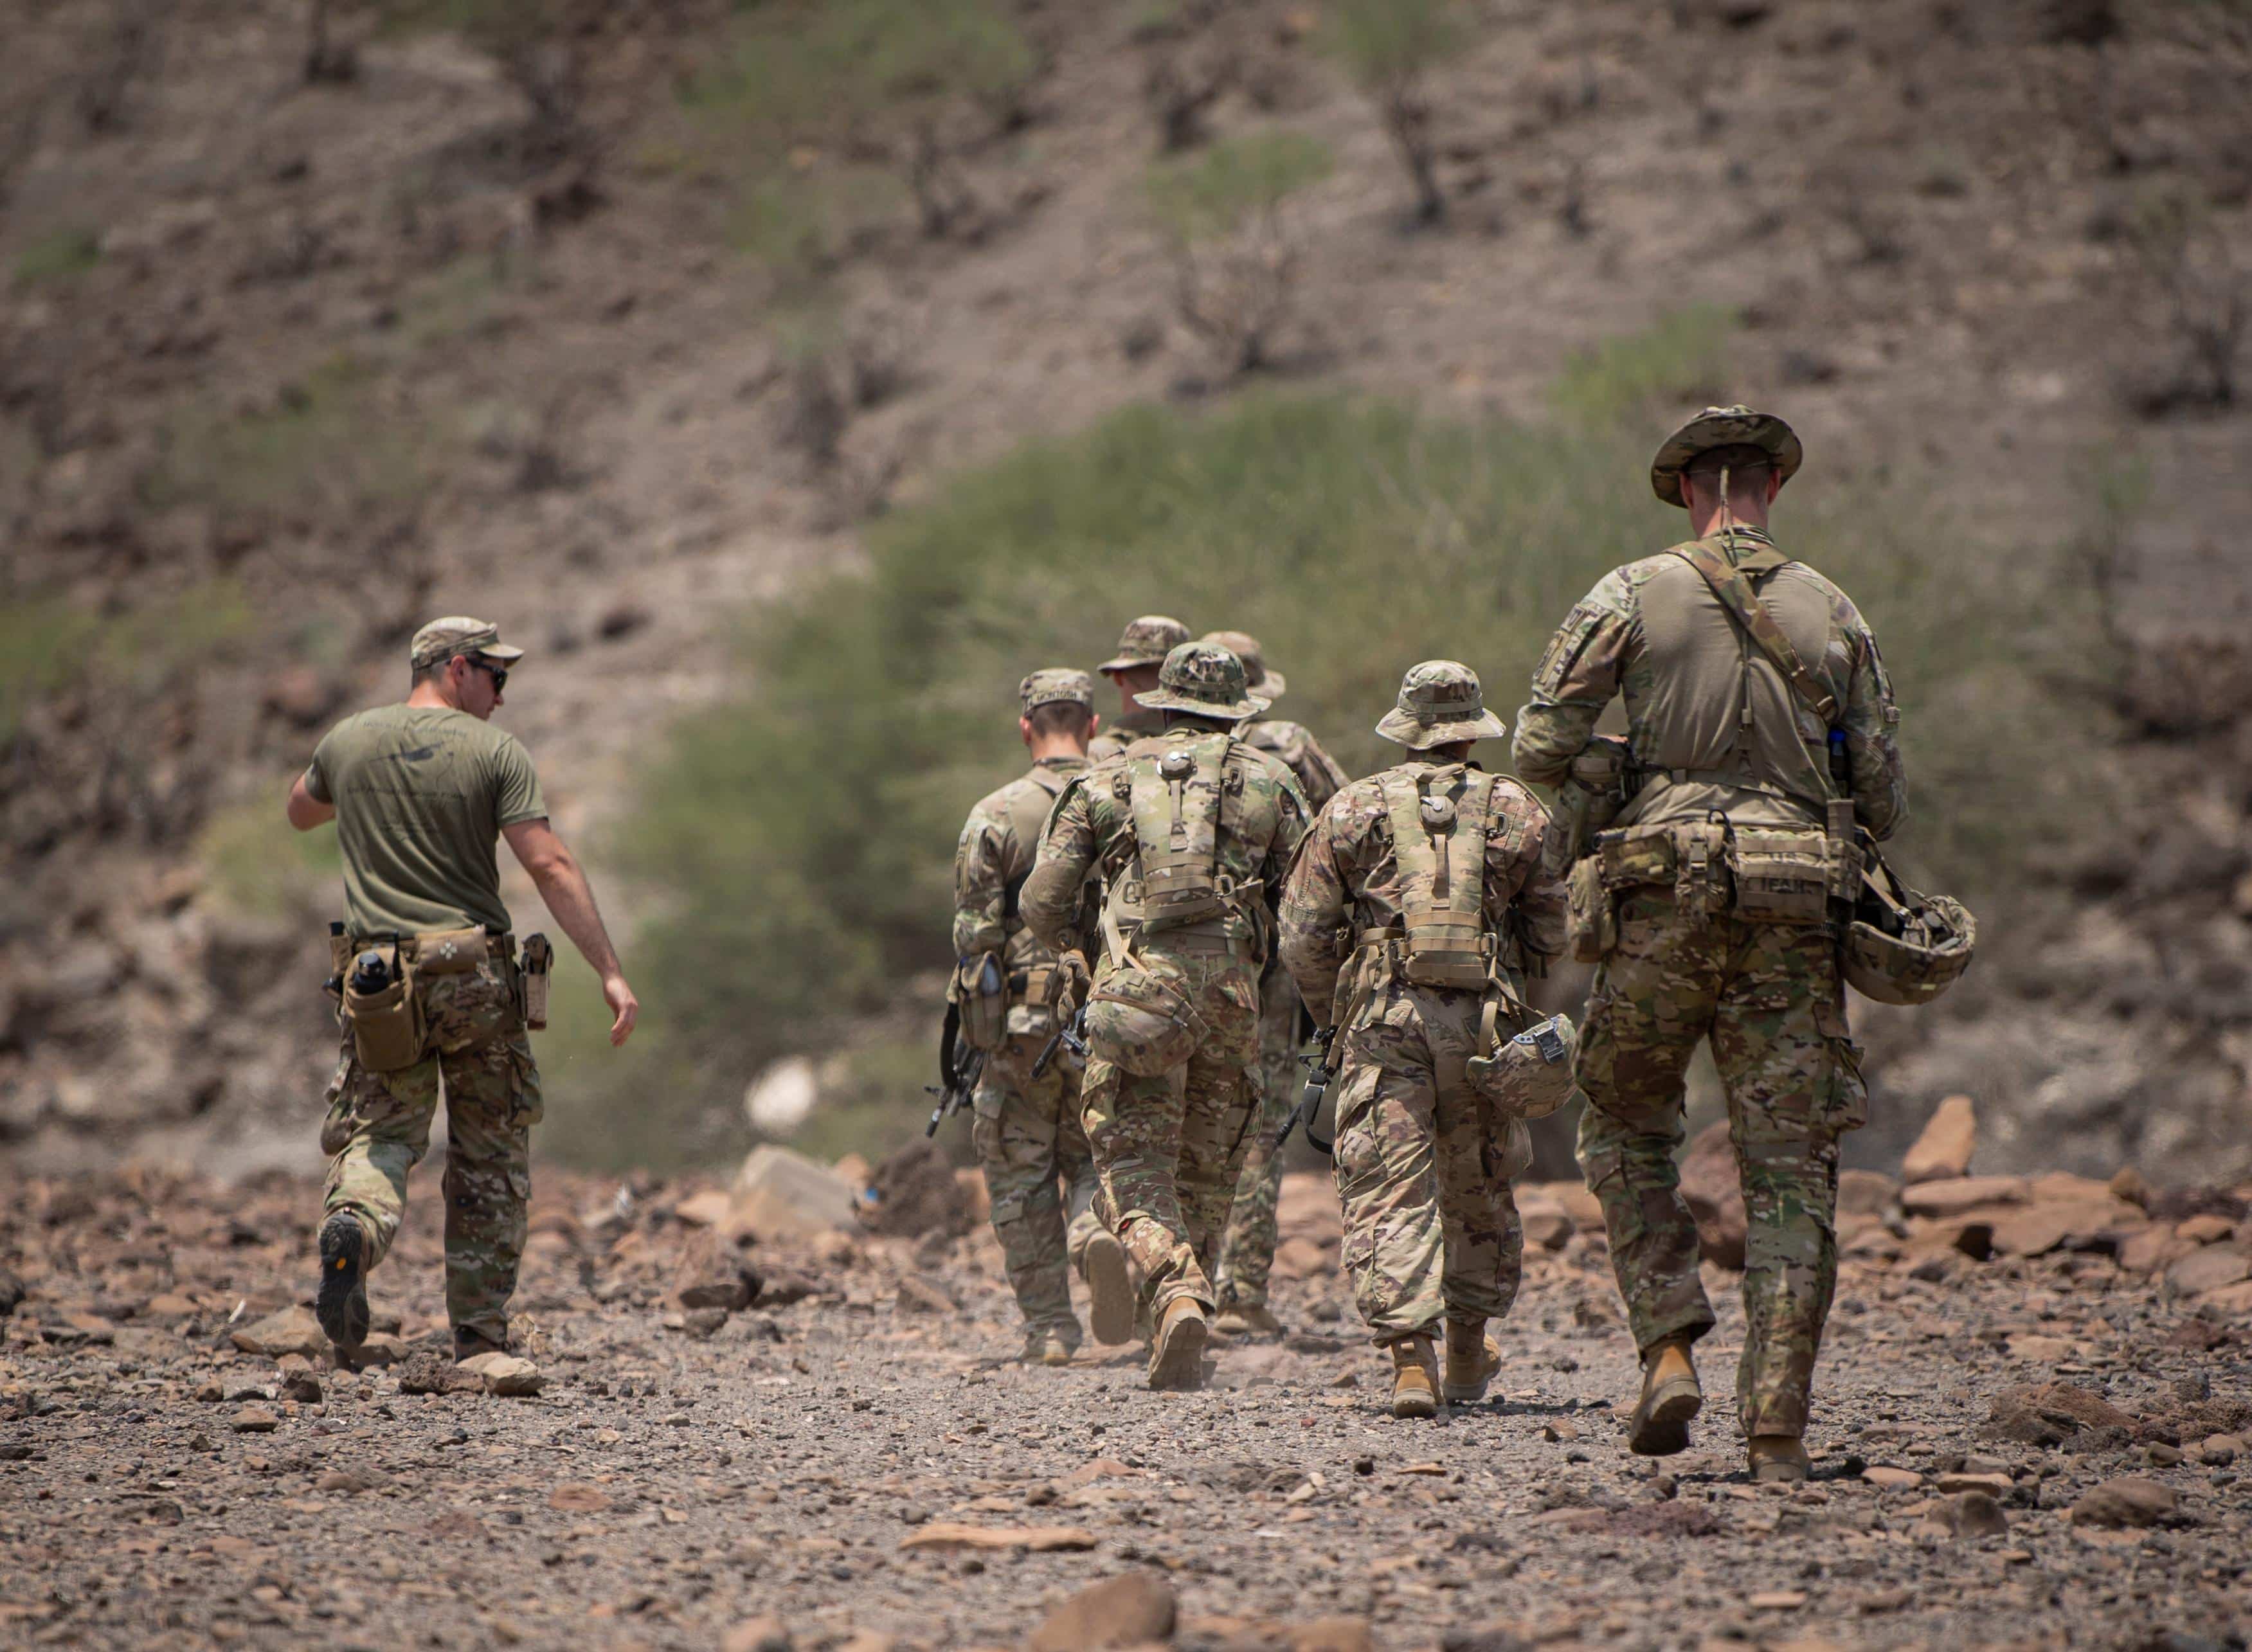 U.S. Army cadre and participants accomplish objectives during a field training exercise at the Djiboutian Range Complex, Djibouti, Aug. 28, 2021.